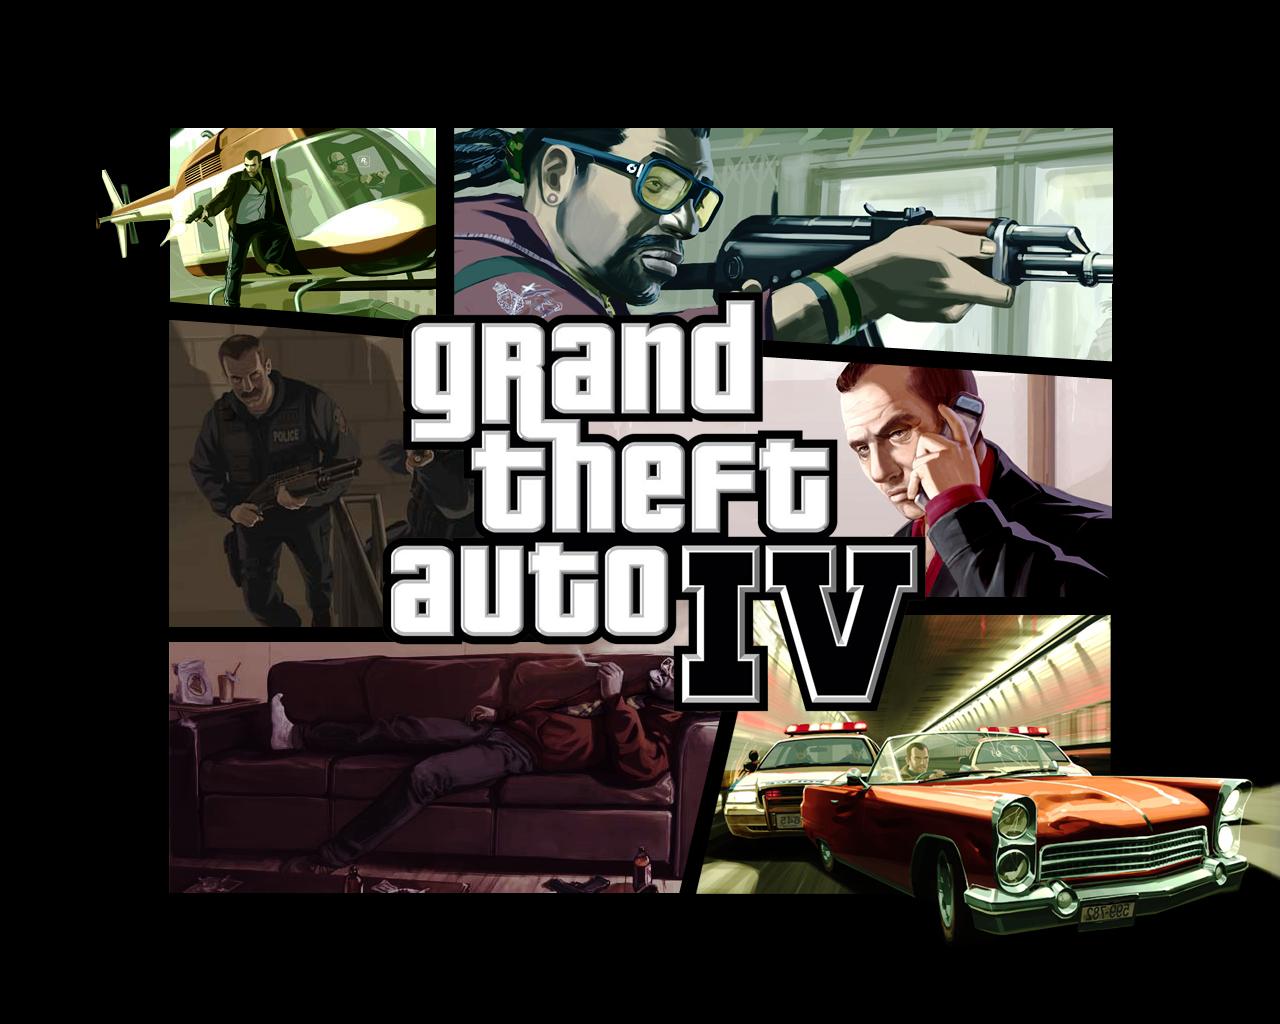 Grand theft auto 5 game download